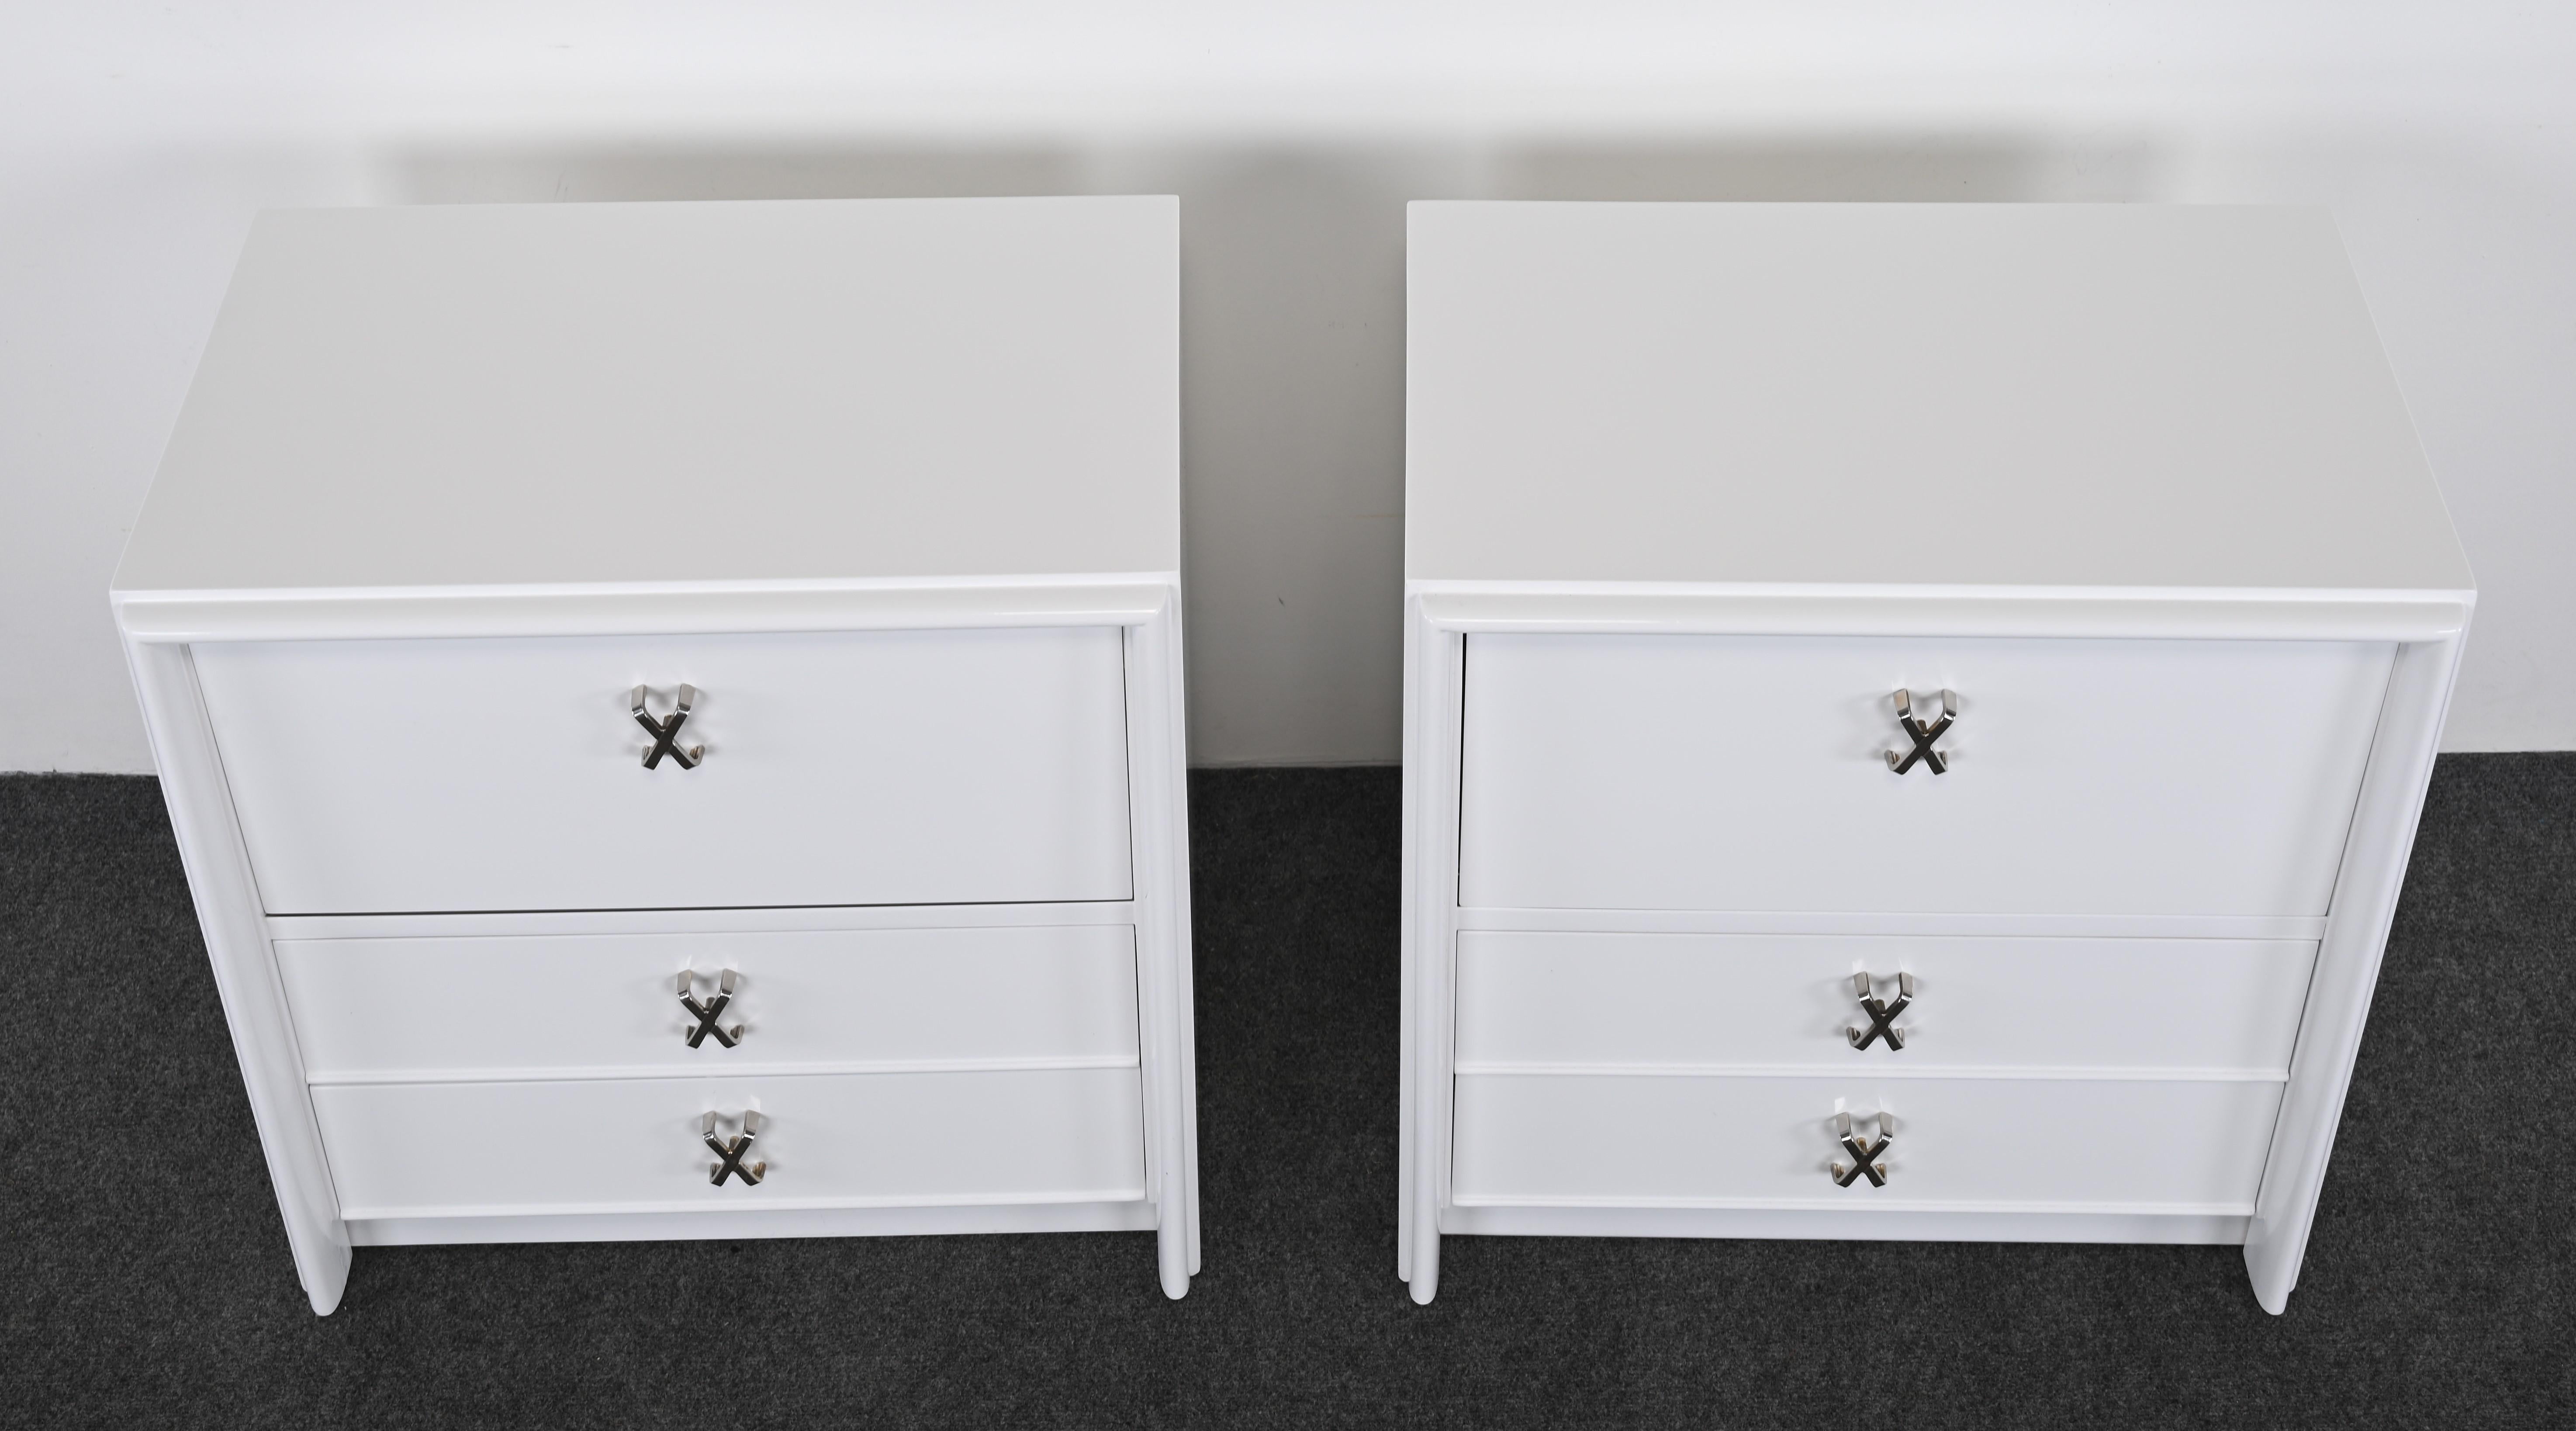 Metal Pair of Bedside Tables with Silver X-Pulls by Paul Frankl, 1950 For Sale